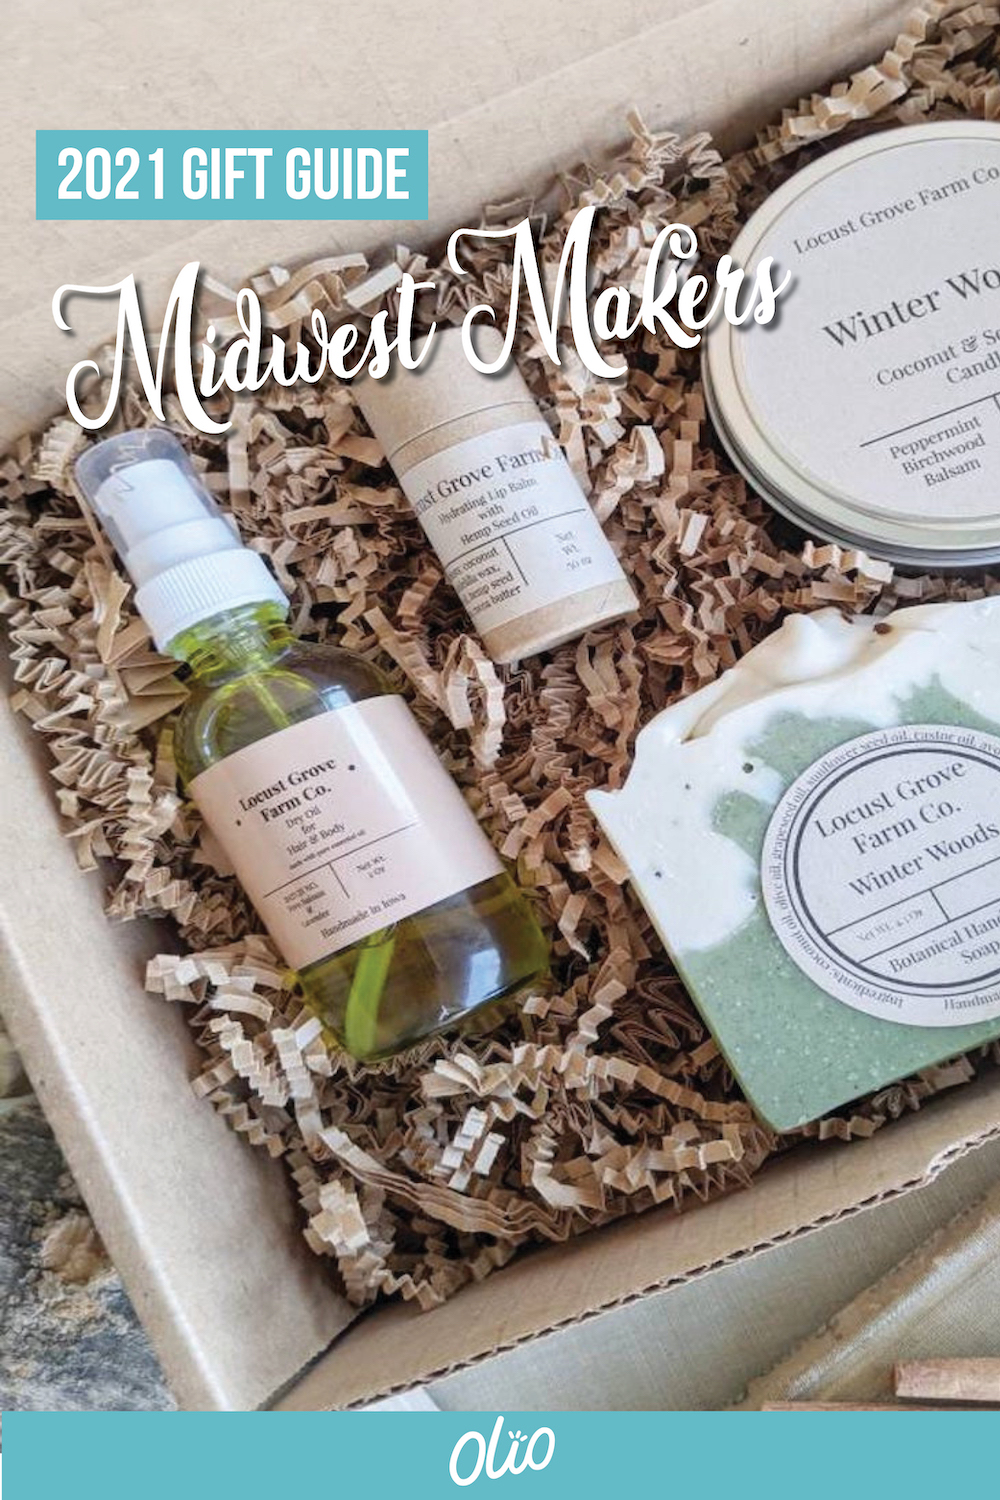 There are few things I love more than supporting small businesses — and that includes our Midwest makers! This year be sure to check out some of the amazing options for gifts from Midwest makers. #giftguide #madeinmidwest #midwestgiftguide